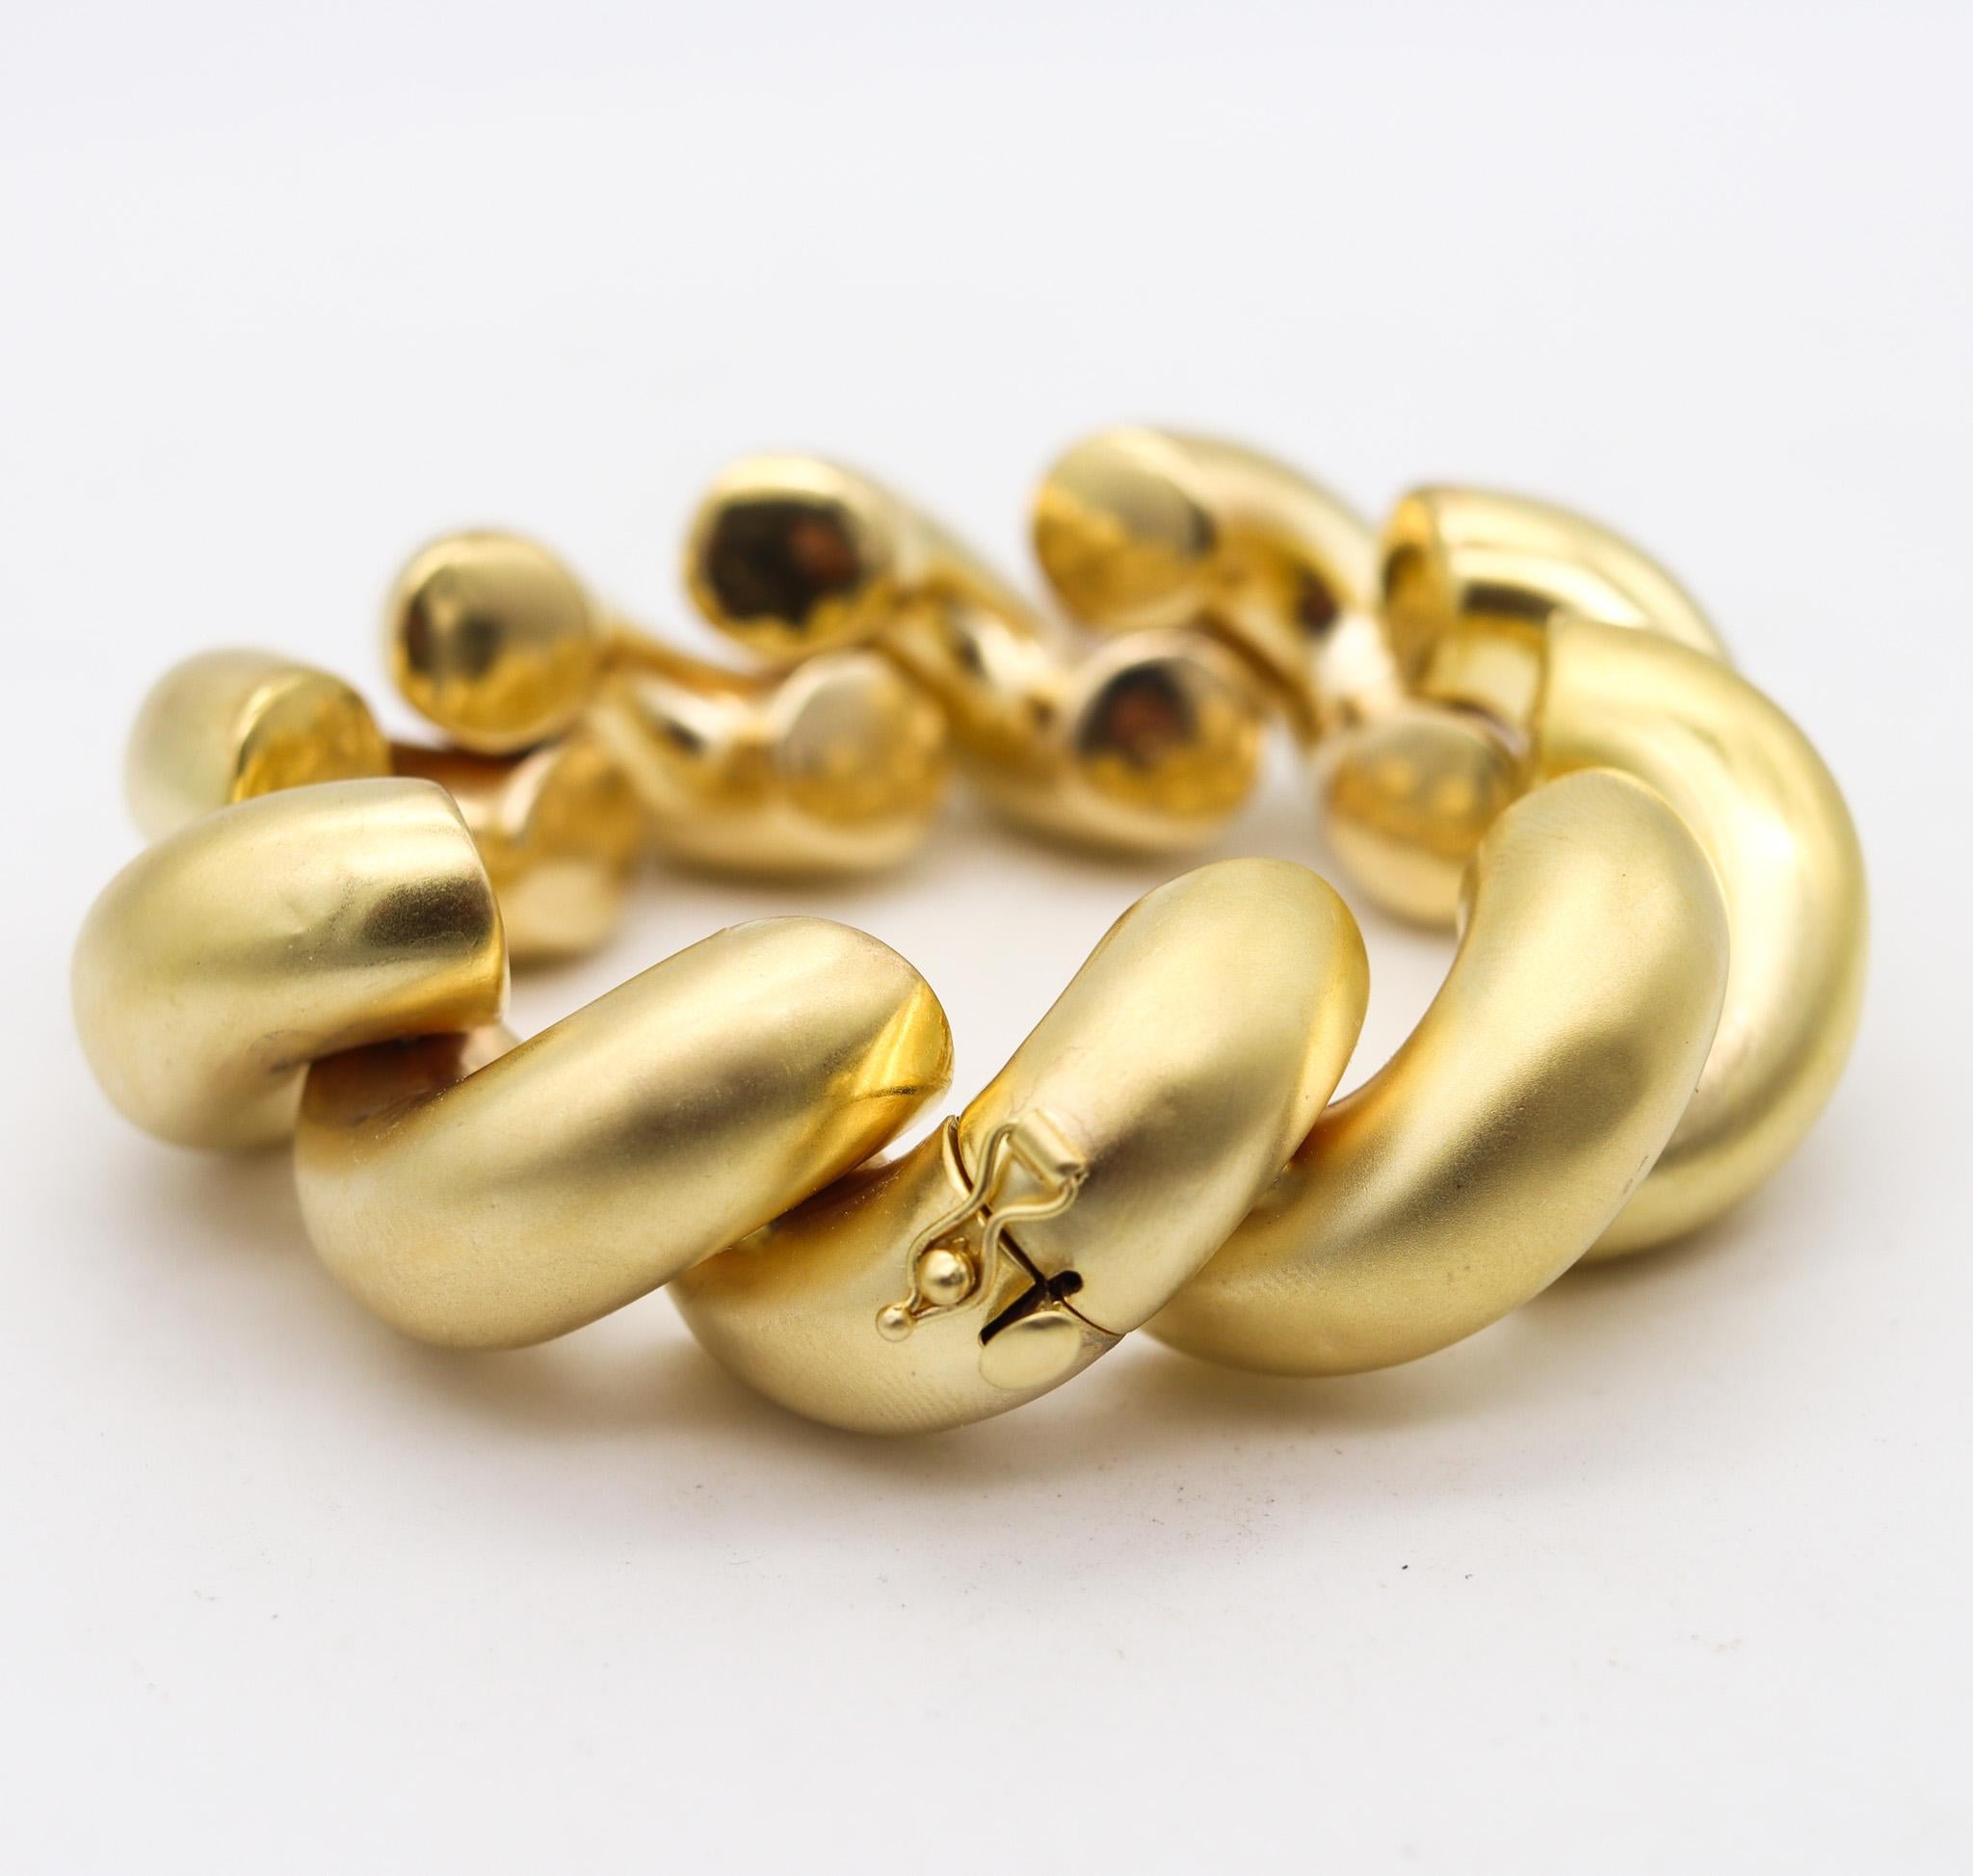 Tiffany & Co. Bold Bracelet with San Marcos Links Brushed 14 Karat Yellow Gold In Excellent Condition For Sale In Miami, FL